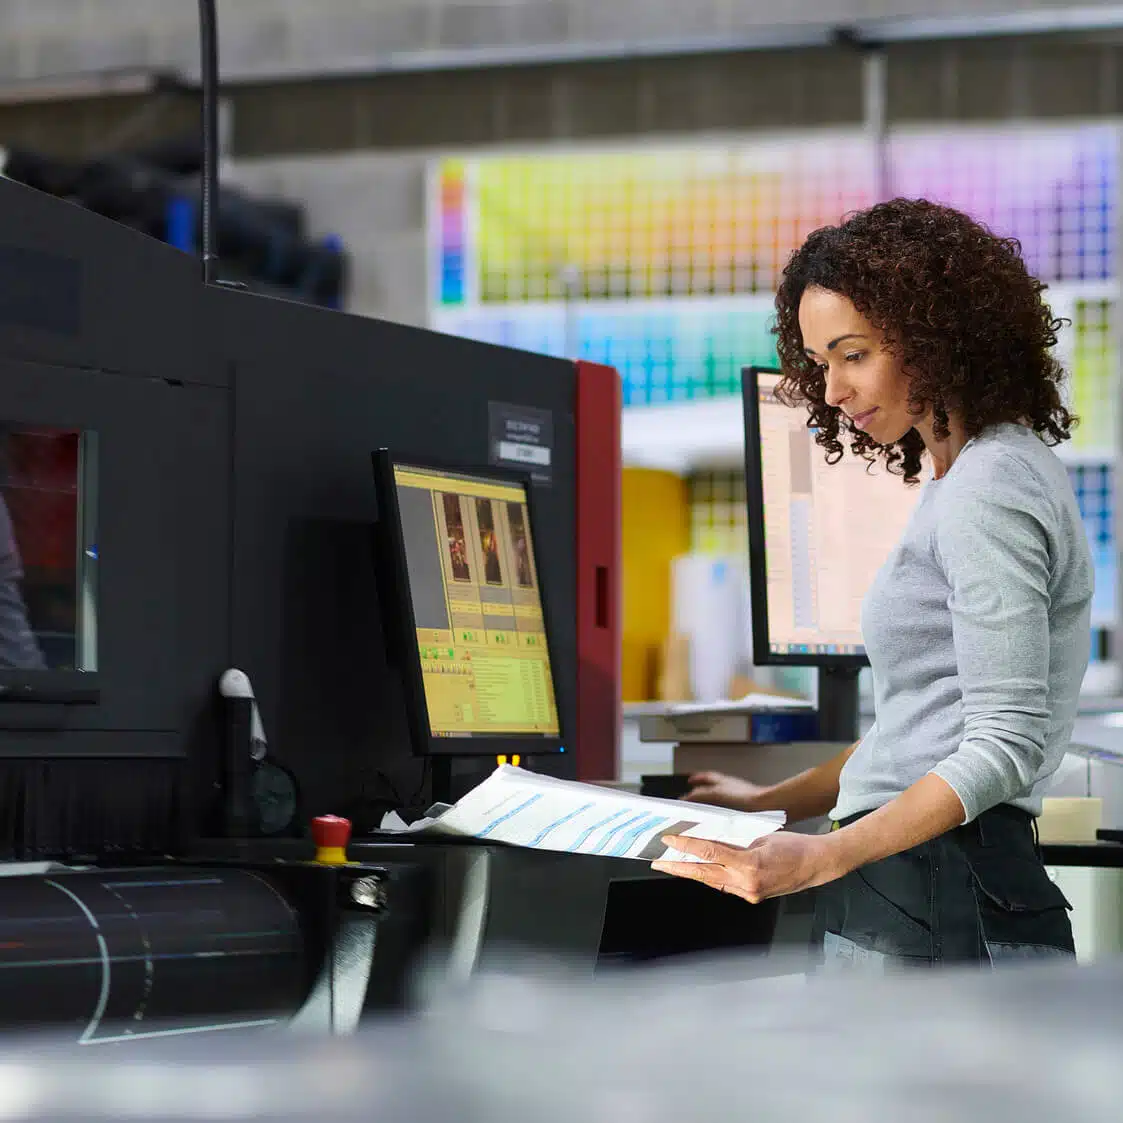 zensmart is showing A woman with curly hair stands in front of a large industrial printer, reviewing a printed document. She is wearing a light gray long-sleeve shirt. The background shows colorful photo prints and computer monitors displaying various graphics. with print workflow automation